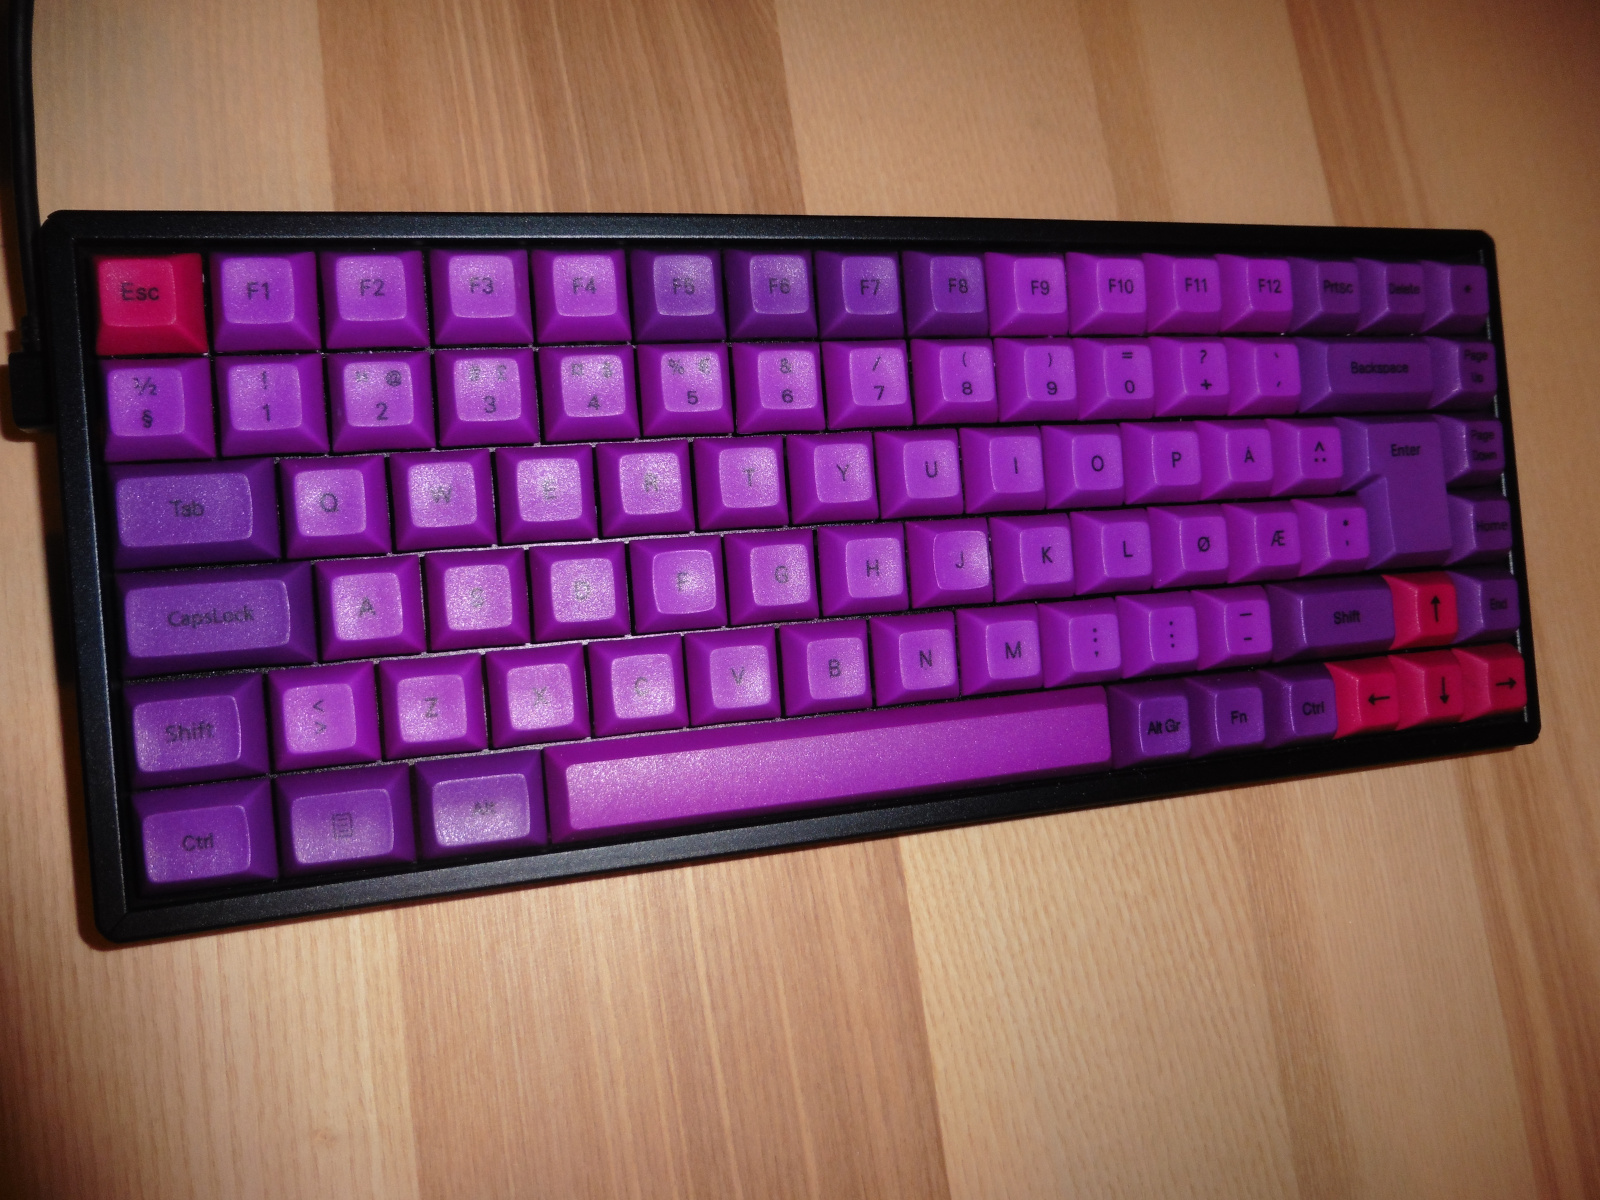 Dyed my keycaps with iDye Poly. Could not be happier.